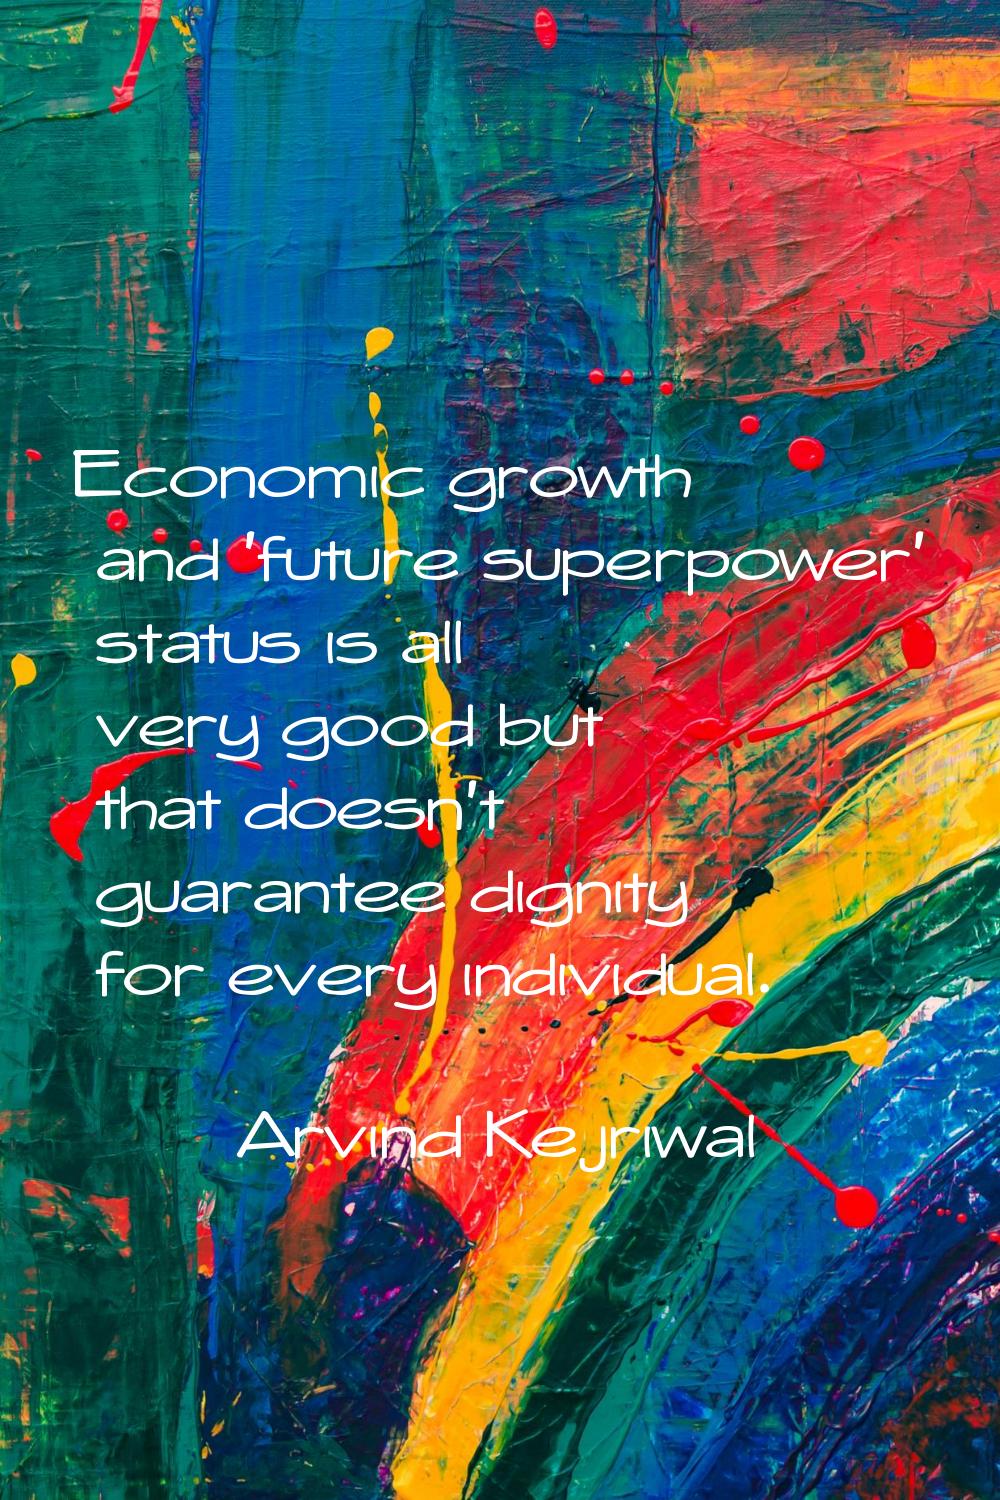 Economic growth and 'future superpower' status is all very good but that doesn't guarantee dignity 